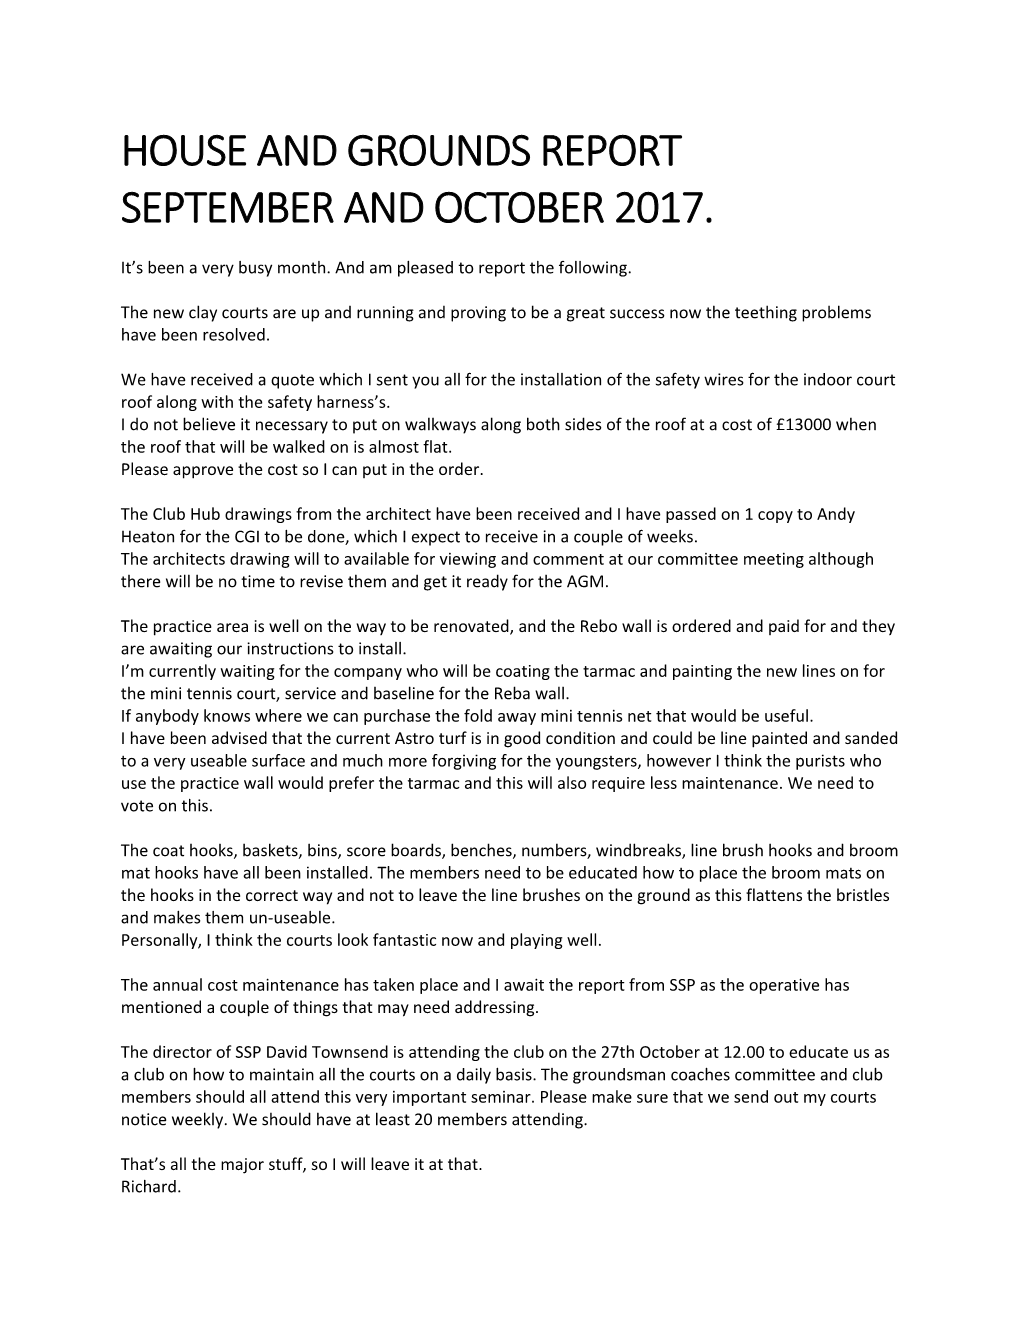 House and Grounds Report September and October 2017